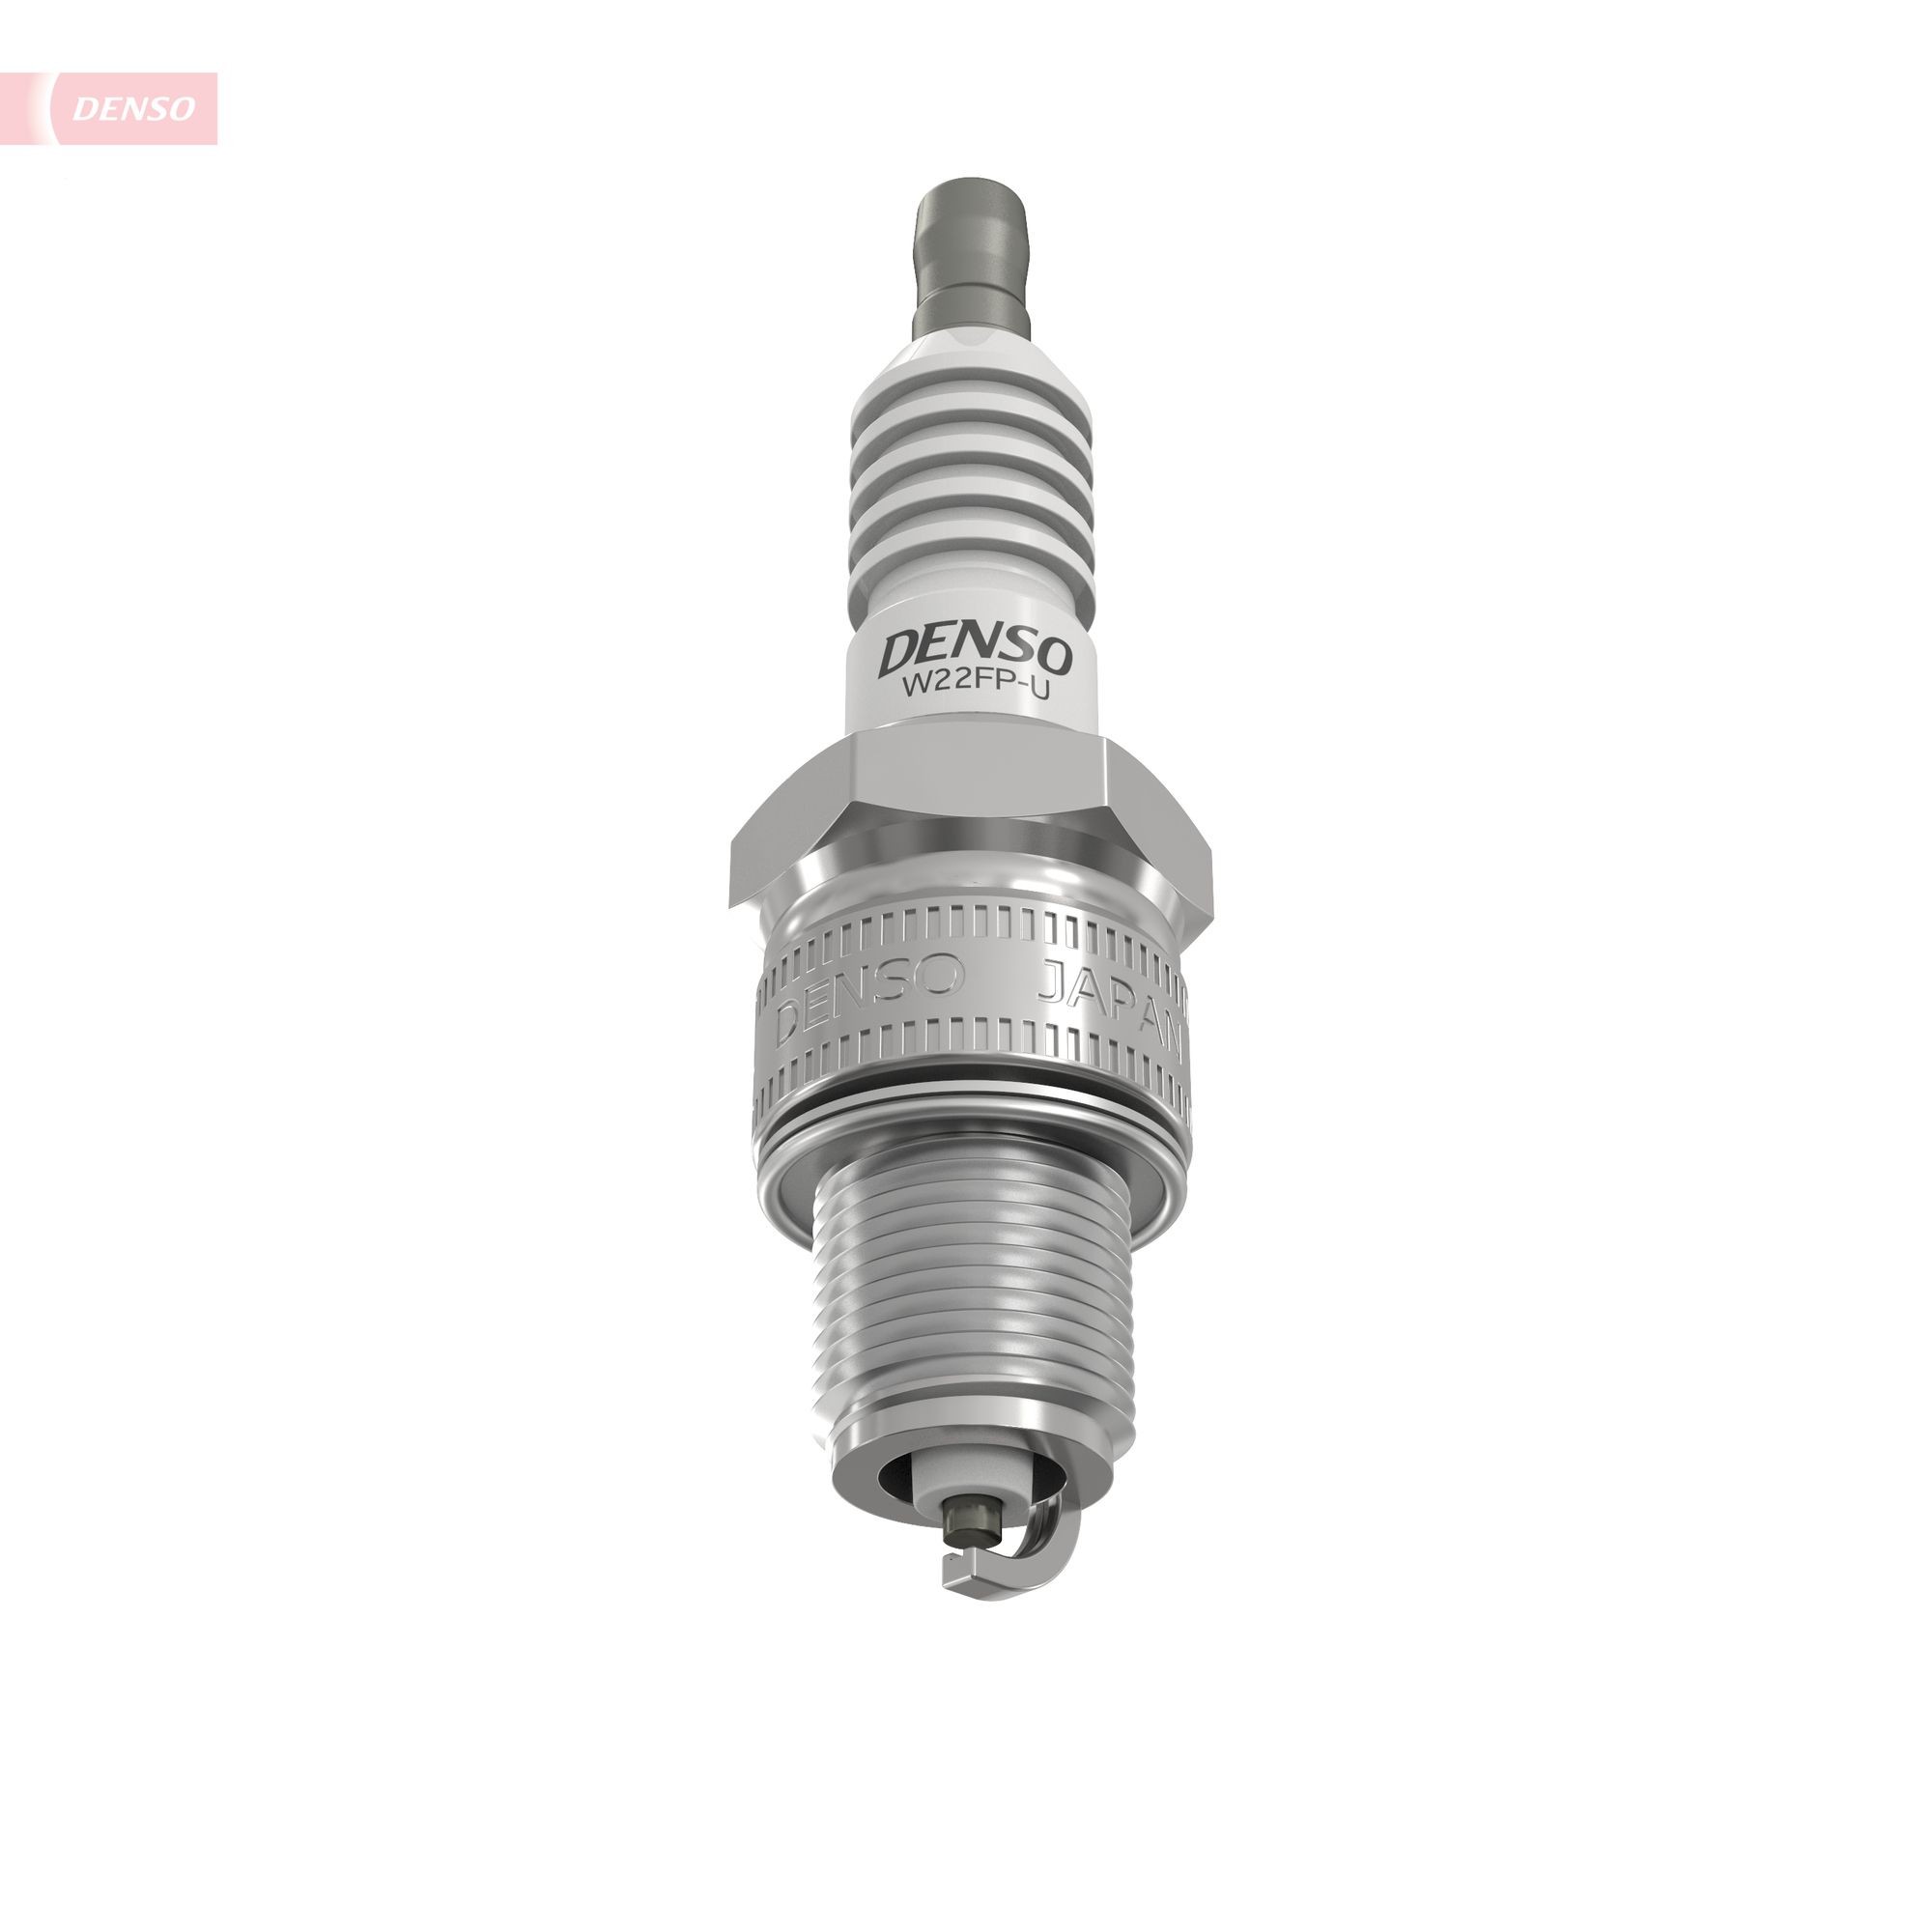 W22FPU Spark plug DENSO D74 review and test